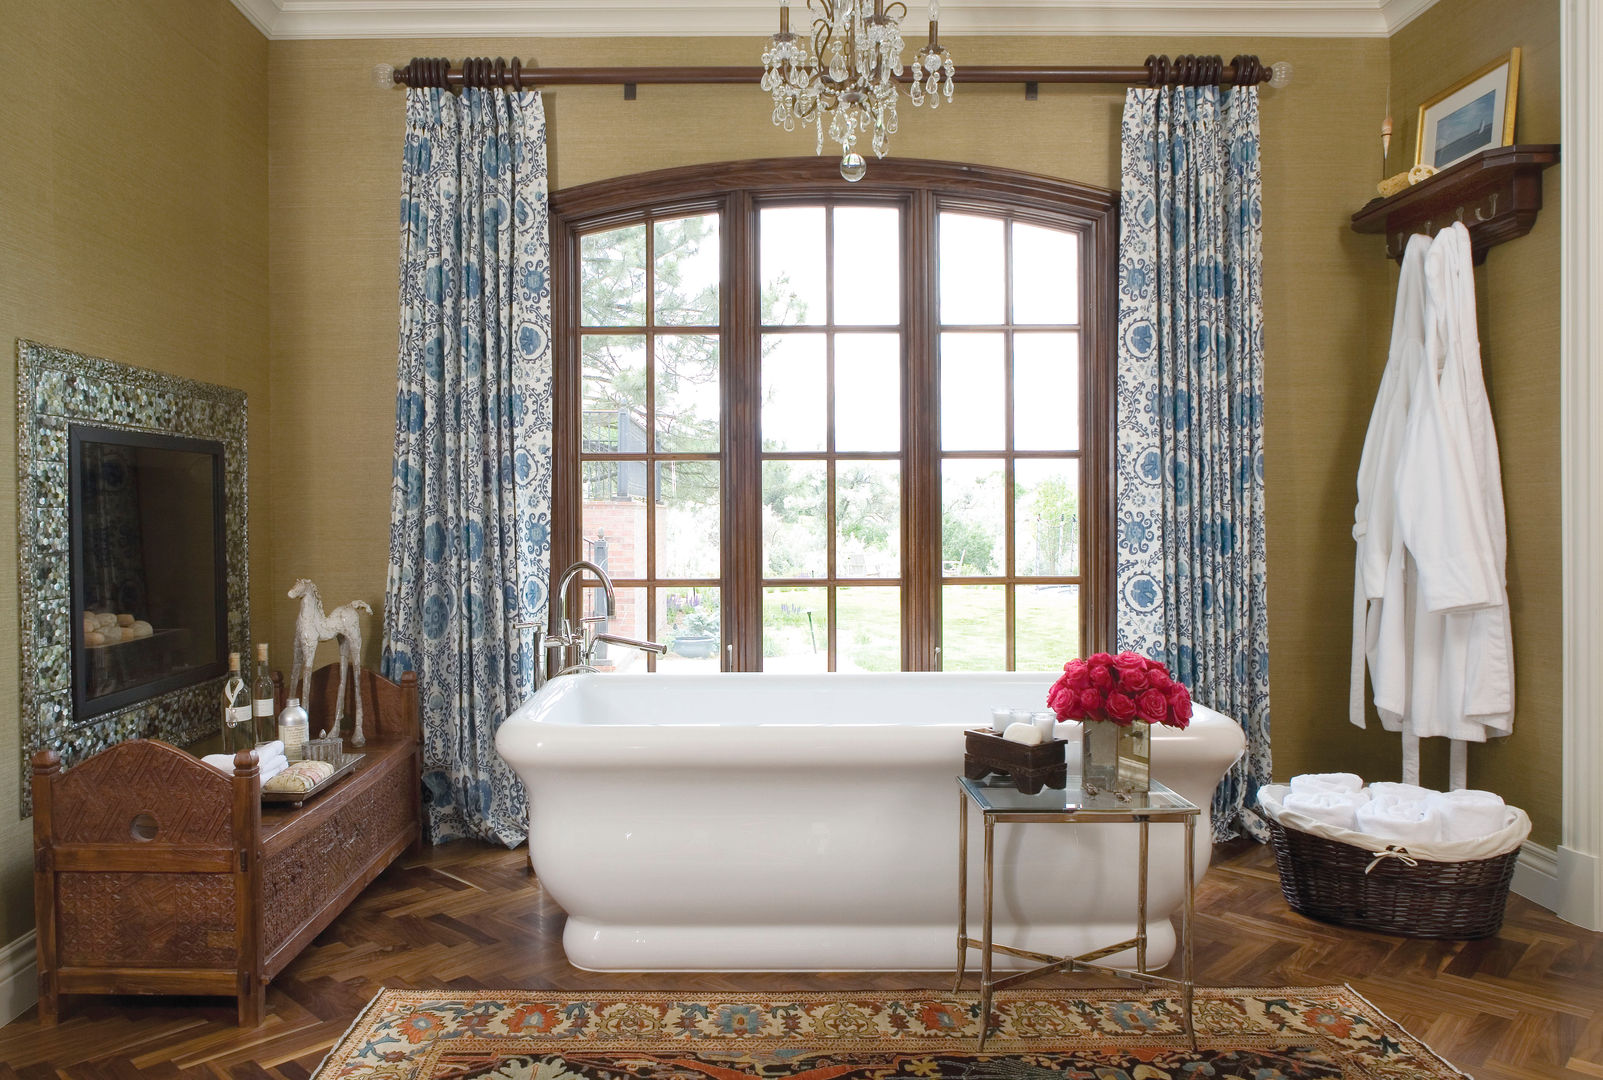 Home of the Year, Andrea Schumacher Interiors Andrea Schumacher Interiors Classic style bathrooms